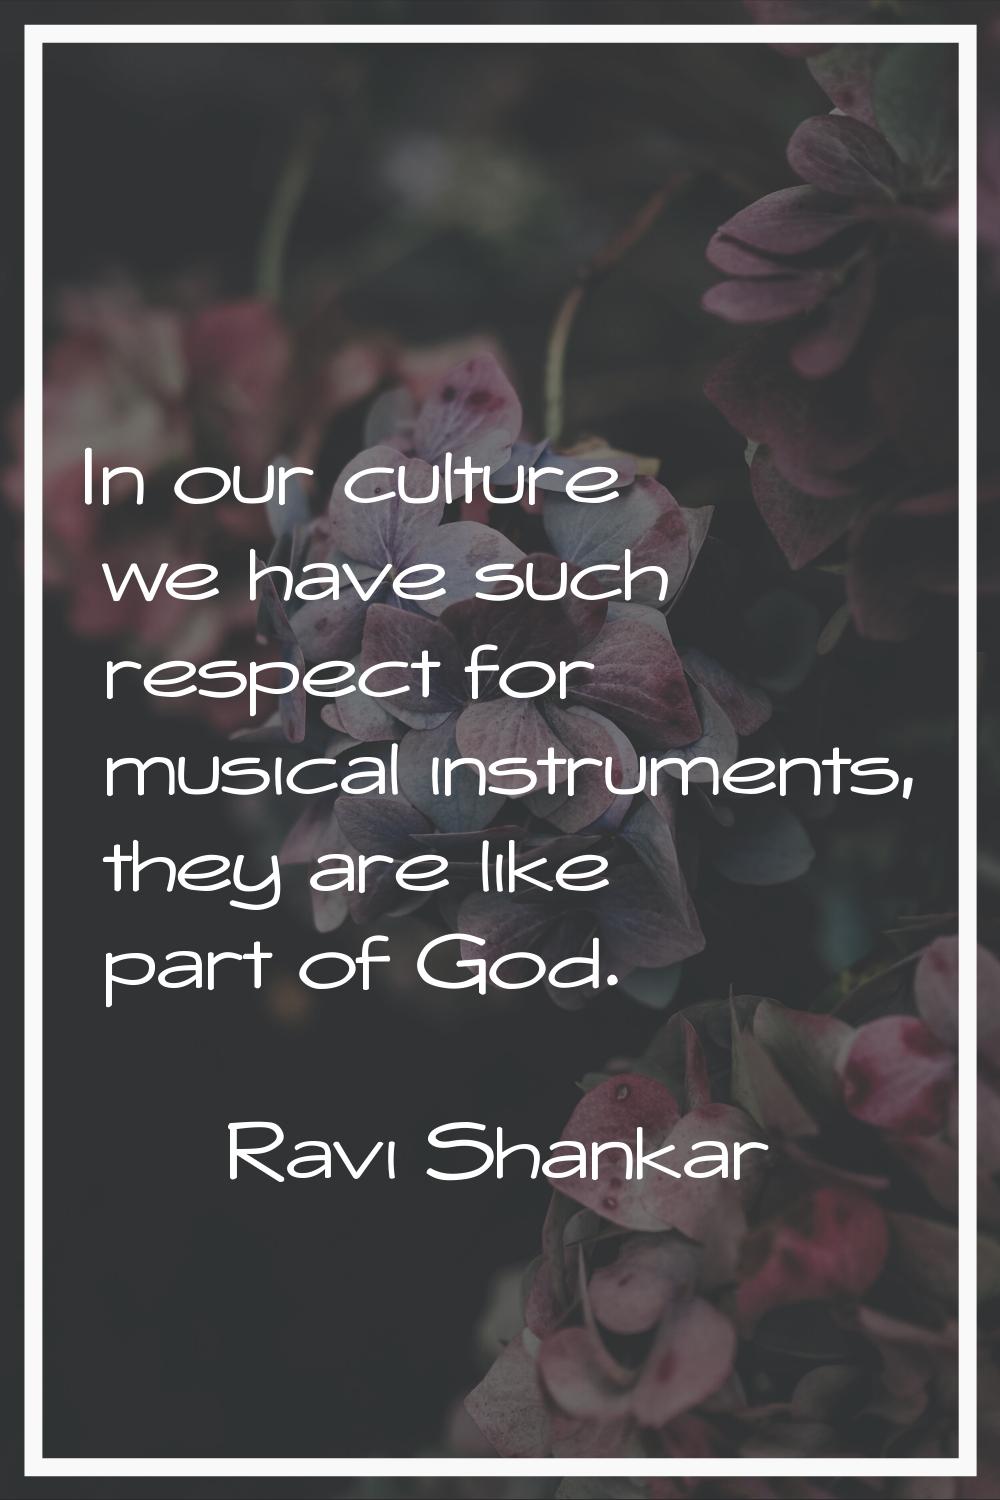 In our culture we have such respect for musical instruments, they are like part of God.